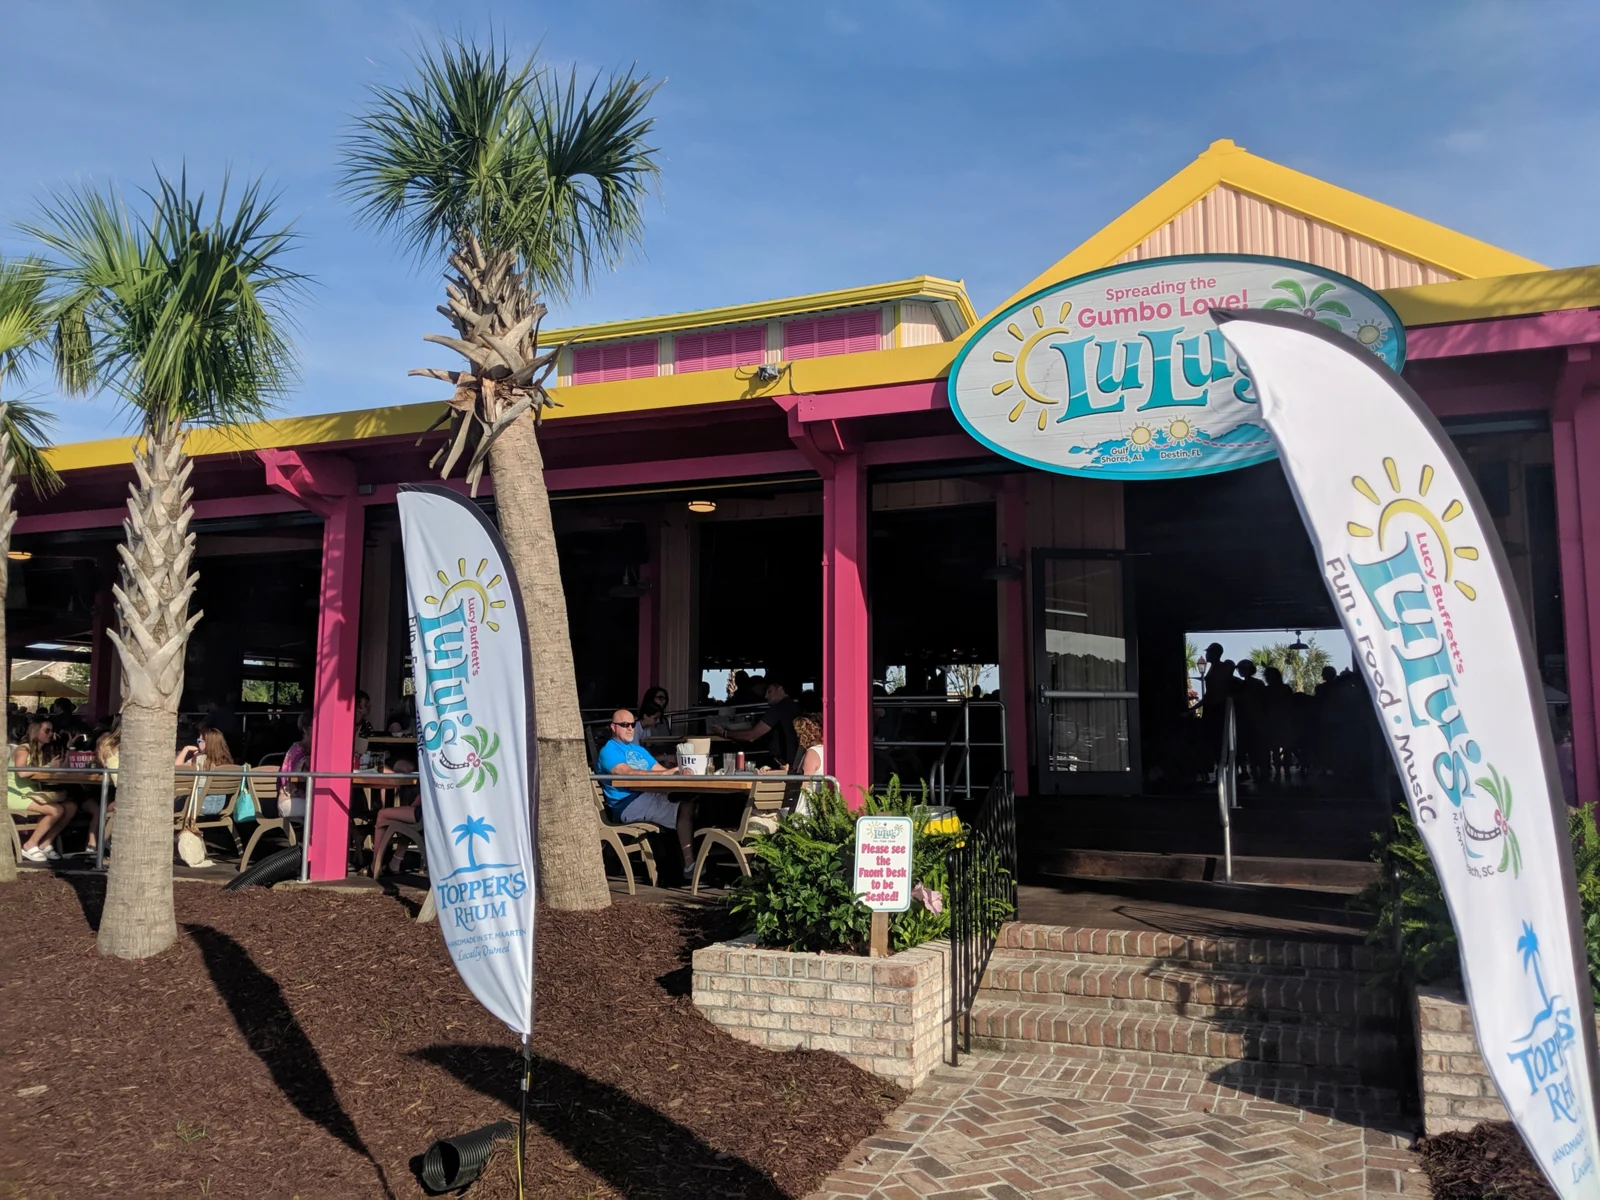 Barefoot landing, one of the best things to do in Myrtle Beach